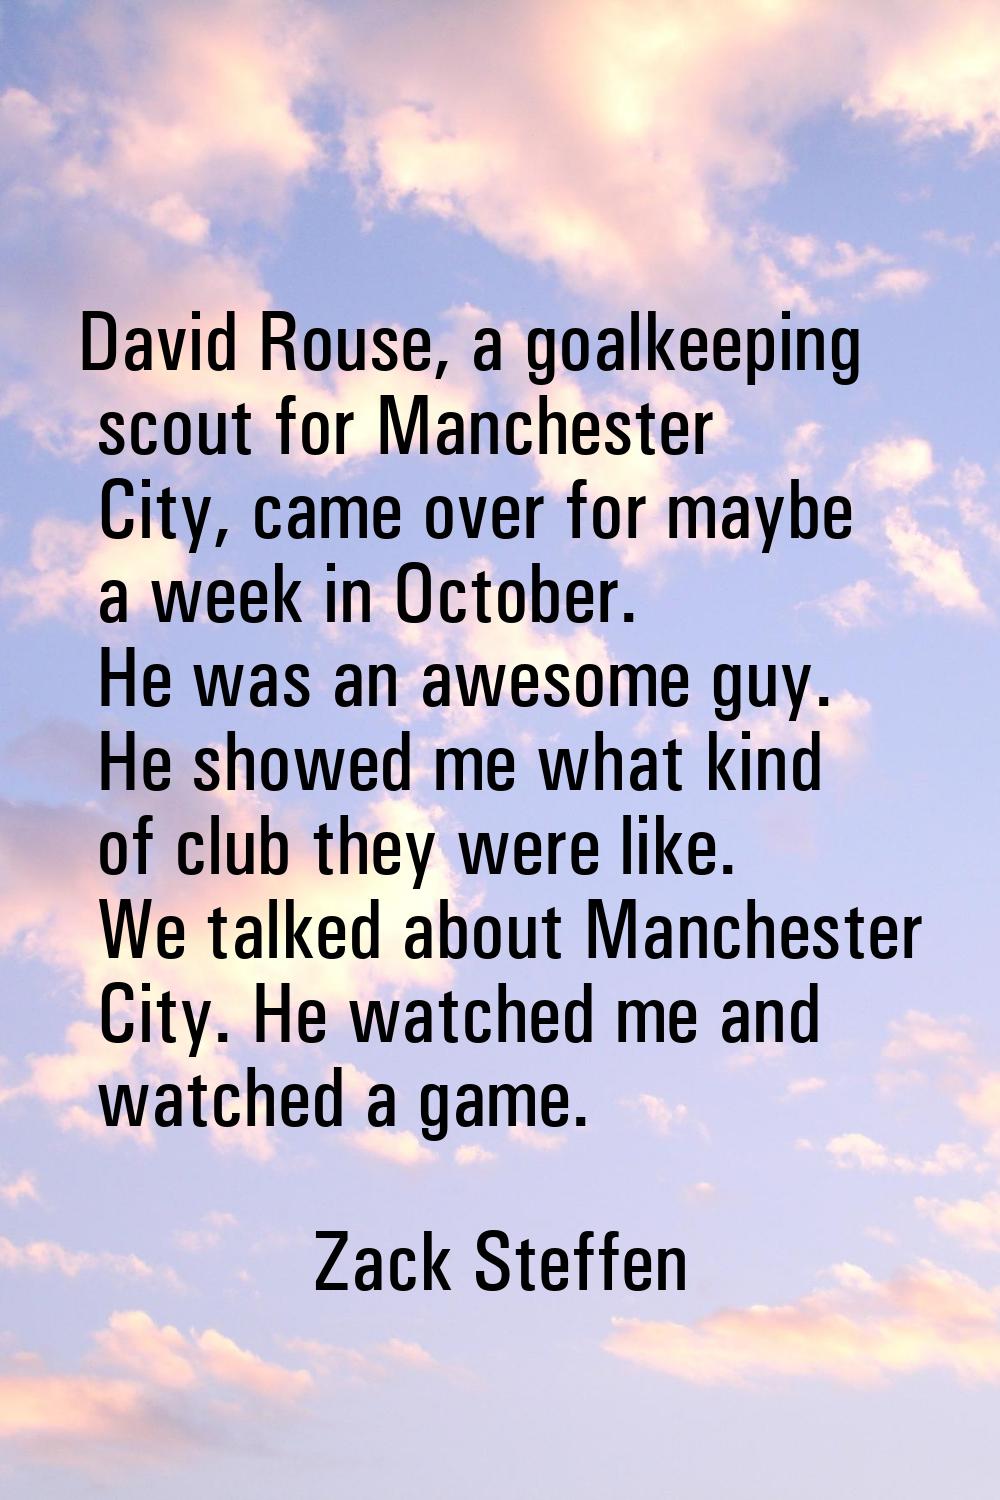 David Rouse, a goalkeeping scout for Manchester City, came over for maybe a week in October. He was